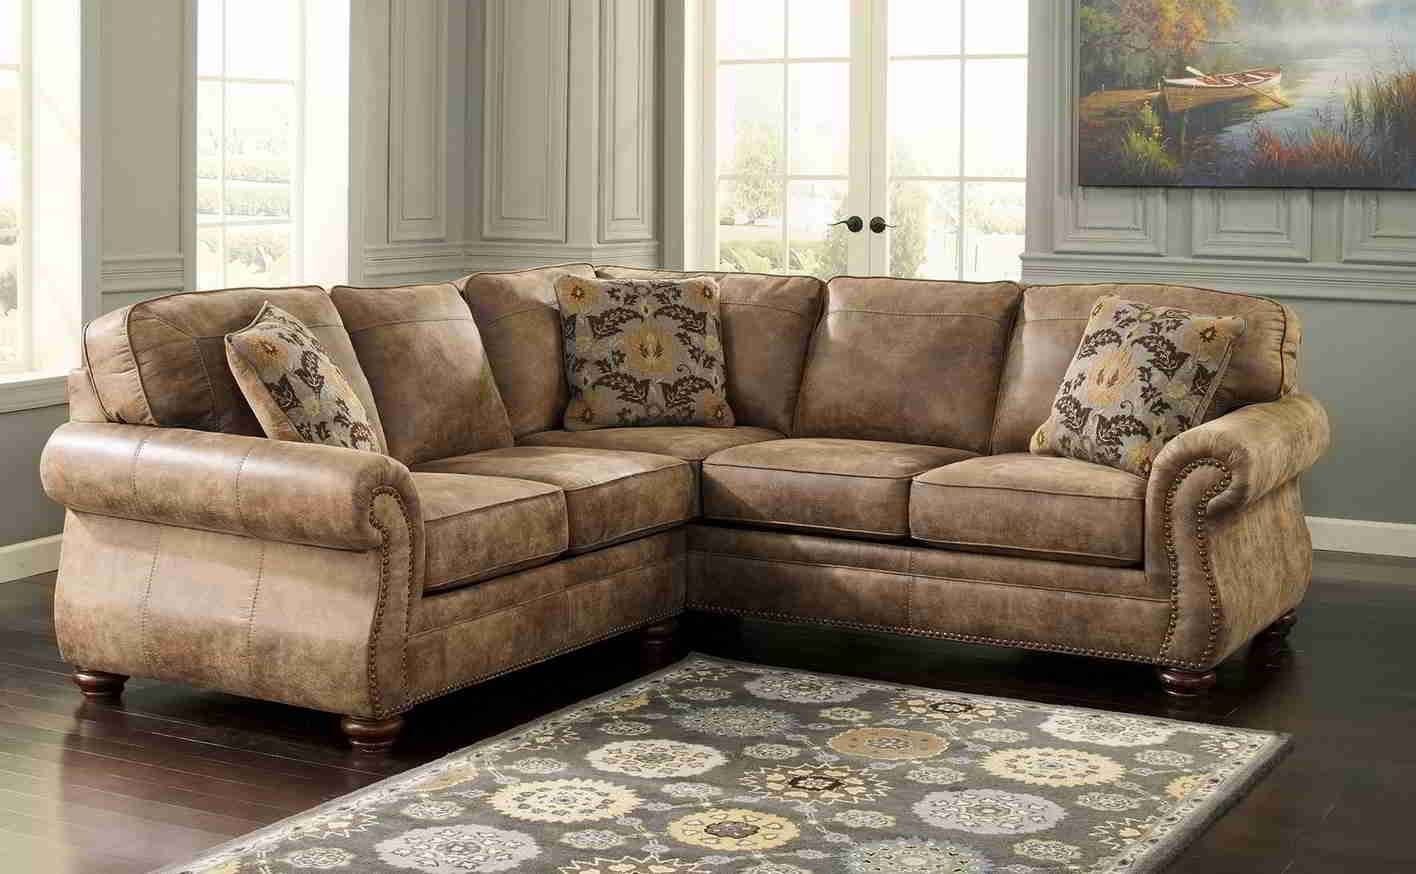 Best Wide Seat Sectional Sofas 95 About Remodel High Back Within Bradley Sectional Sofas (View 9 of 15)